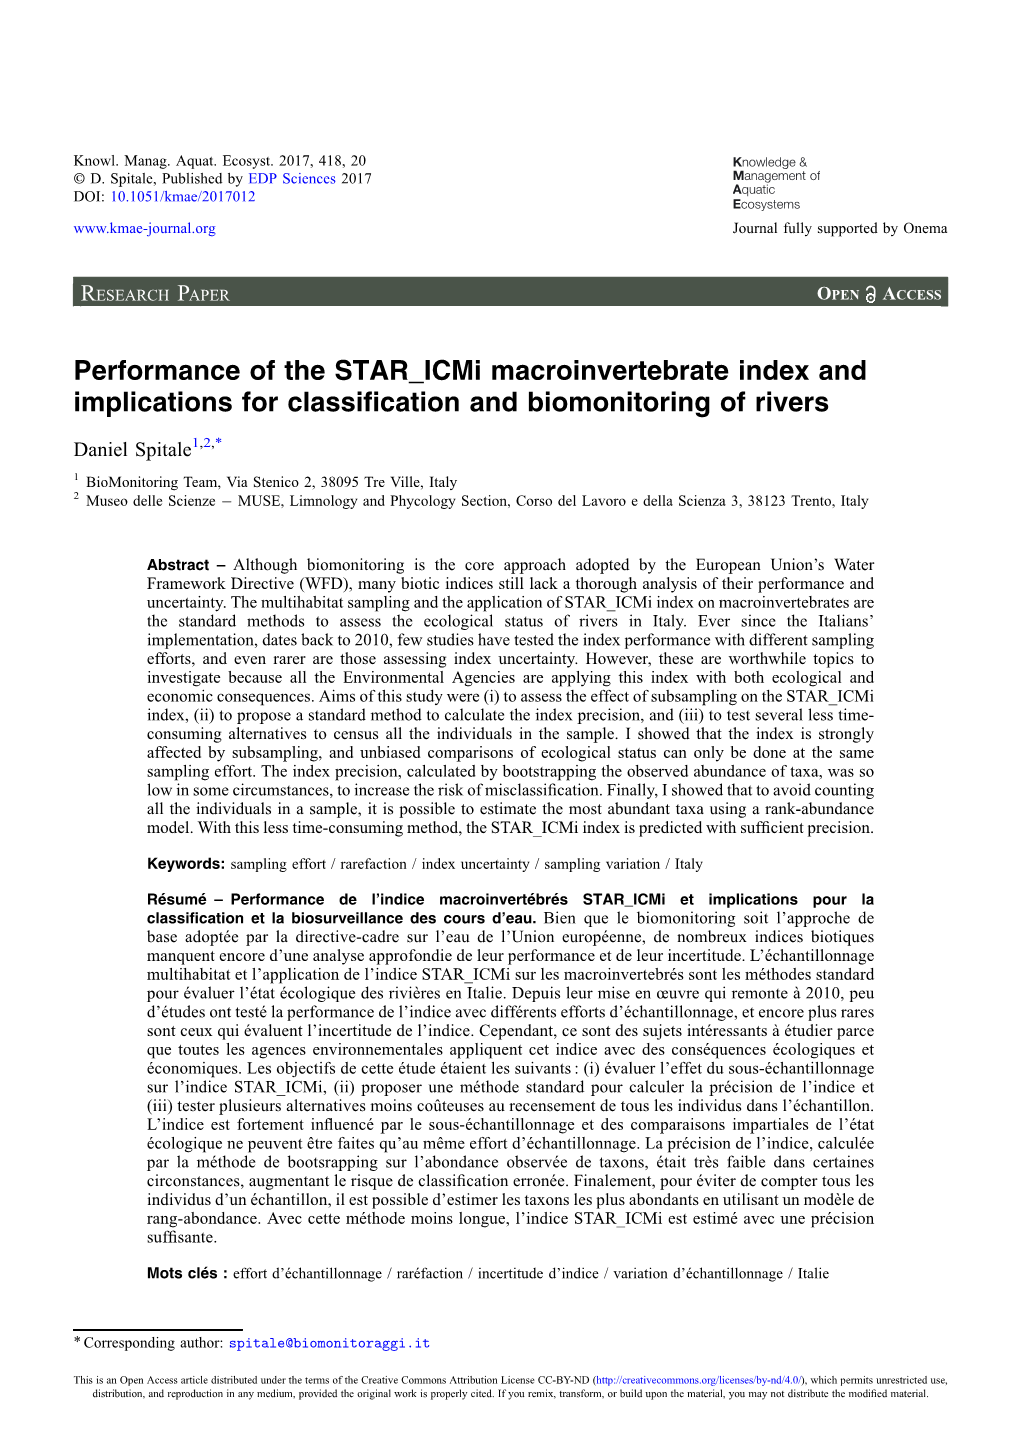 Performance of the STAR Icmi Macroinvertebrate Index and Implications for Classiﬁcation and Biomonitoring of Rivers